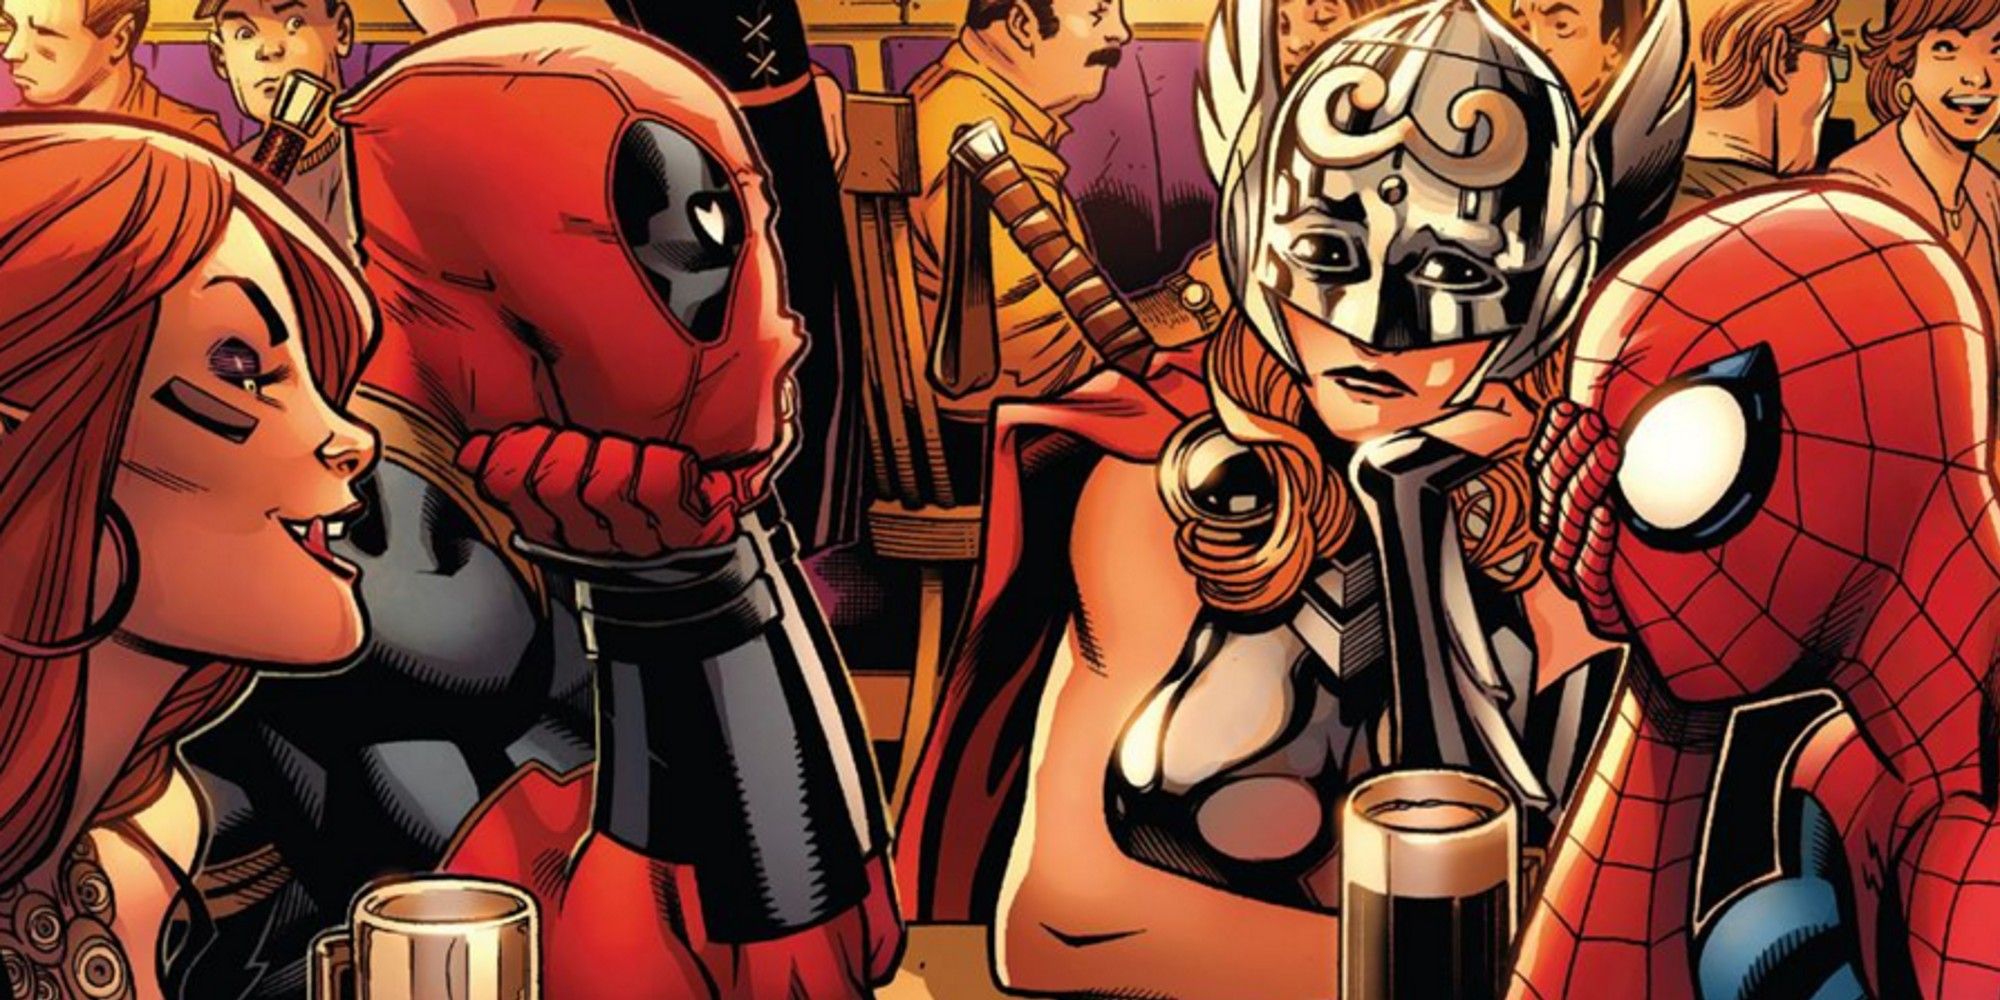 Marvel Comics, Deadpool and Spider Man on a double date with succubus and Jane Foster Thor